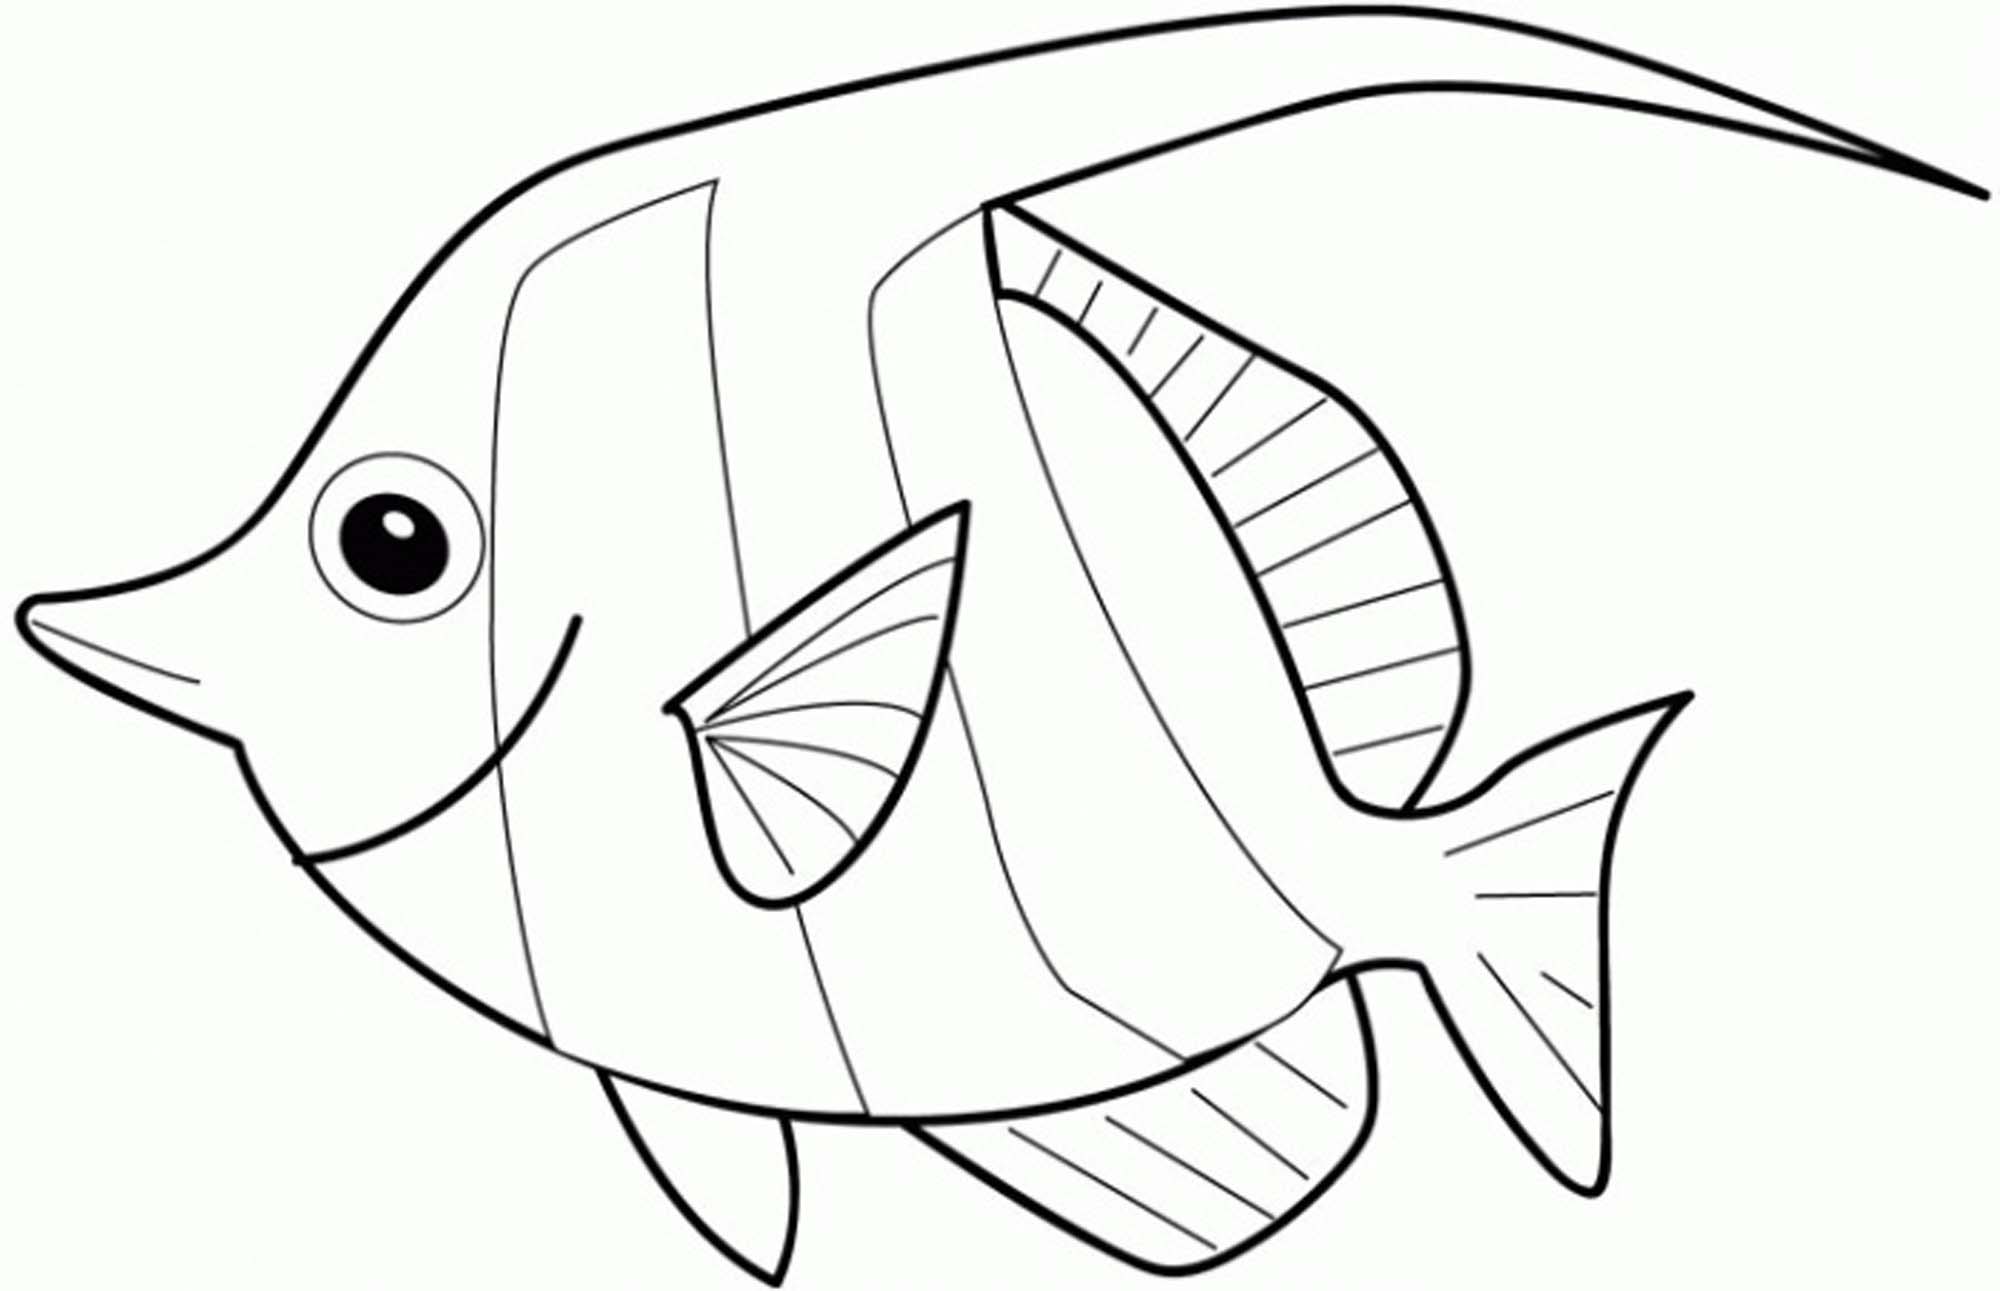 rainbow fish coloring page - Printable Kids Colouring Pages